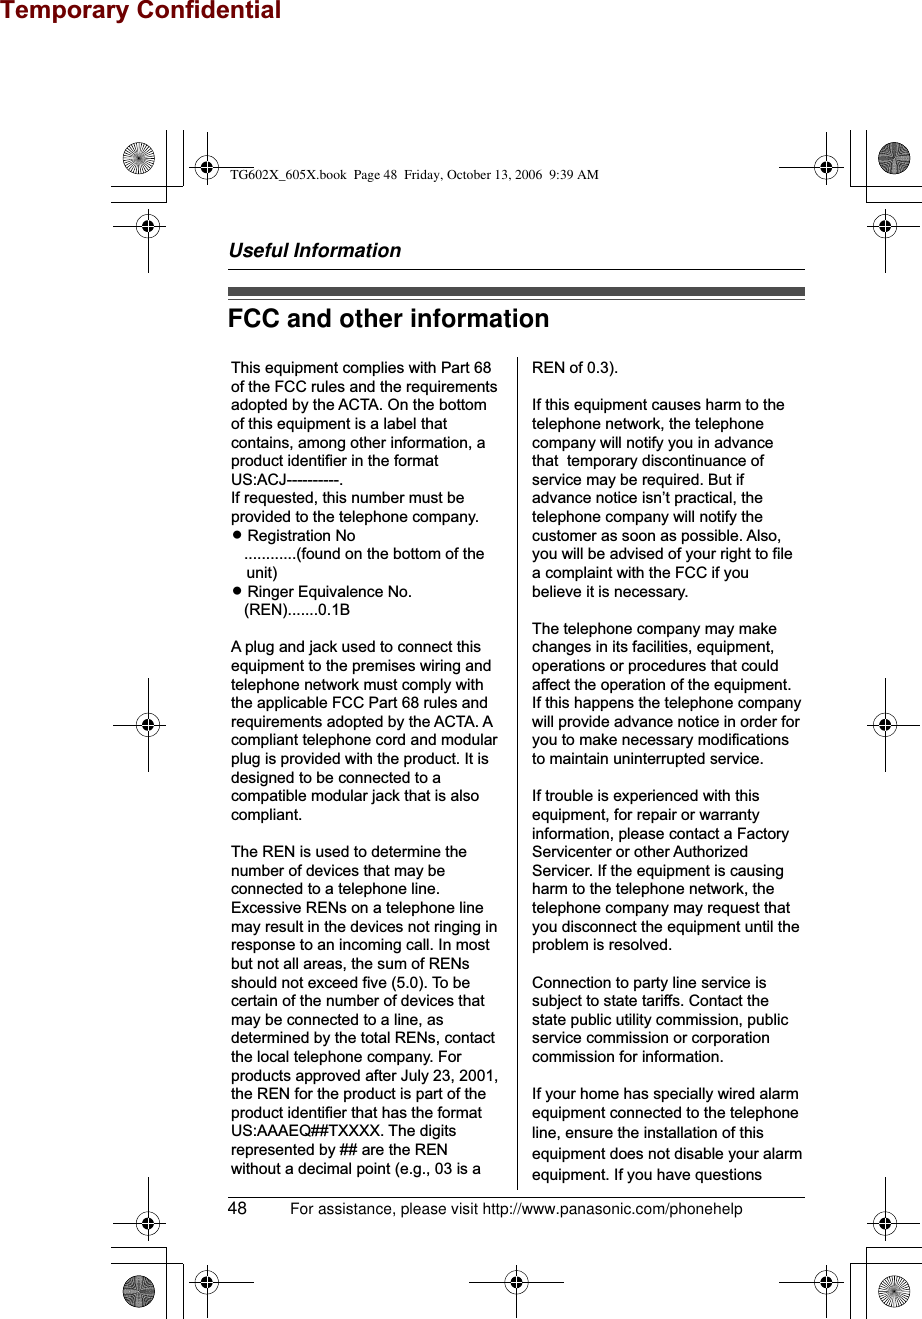 Useful Information48 For assistance, please visit http://www.panasonic.com/phonehelpFCC and other informationThis equipment complies with Part 68 of the FCC rules and the requirements adopted by the ACTA. On the bottom of this equipment is a label that contains, among other information, a product identifier in the format US:ACJ----------.If requested, this number must be provided to the telephone company.L Registration No   ............(found on the bottom of the unit)L Ringer Equivalence No.   (REN).......0.1BA plug and jack used to connect this equipment to the premises wiring and telephone network must comply with the applicable FCC Part 68 rules and requirements adopted by the ACTA. A compliant telephone cord and modular plug is provided with the product. It is designed to be connected to a compatible modular jack that is also compliant.The REN is used to determine the number of devices that may be connected to a telephone line. Excessive RENs on a telephone line may result in the devices not ringing in response to an incoming call. In most but not all areas, the sum of RENs should not exceed five (5.0). To be certain of the number of devices that may be connected to a line, as determined by the total RENs, contact the local telephone company. For products approved after July 23, 2001, the REN for the product is part of the product identifier that has the format US:AAAEQ##TXXXX. The digits represented by ## are the REN without a decimal point (e.g., 03 is a REN of 0.3).If this equipment causes harm to the telephone network, the telephone company will notify you in advance that  temporary discontinuance of service may be required. But if advance notice isn’t practical, the telephone company will notify the customer as soon as possible. Also, you will be advised of your right to file a complaint with the FCC if you believe it is necessary.The telephone company may make changes in its facilities, equipment, operations or procedures that could affect the operation of the equipment. If this happens the telephone company will provide advance notice in order for you to make necessary modifications to maintain uninterrupted service.If trouble is experienced with this equipment, for repair or warranty information, please contact a Factory Servicenter or other Authorized Servicer. If the equipment is causing harm to the telephone network, the telephone company may request that you disconnect the equipment until the problem is resolved.Connection to party line service is subject to state tariffs. Contact the state public utility commission, public service commission or corporation commission for information.If your home has specially wired alarm equipment connected to the telephone line, ensure the installation of this equipment does not disable your alarm equipment. If you have questions TG602X_605X.book  Page 48  Friday, October 13, 2006  9:39 AMTemporary Confidential